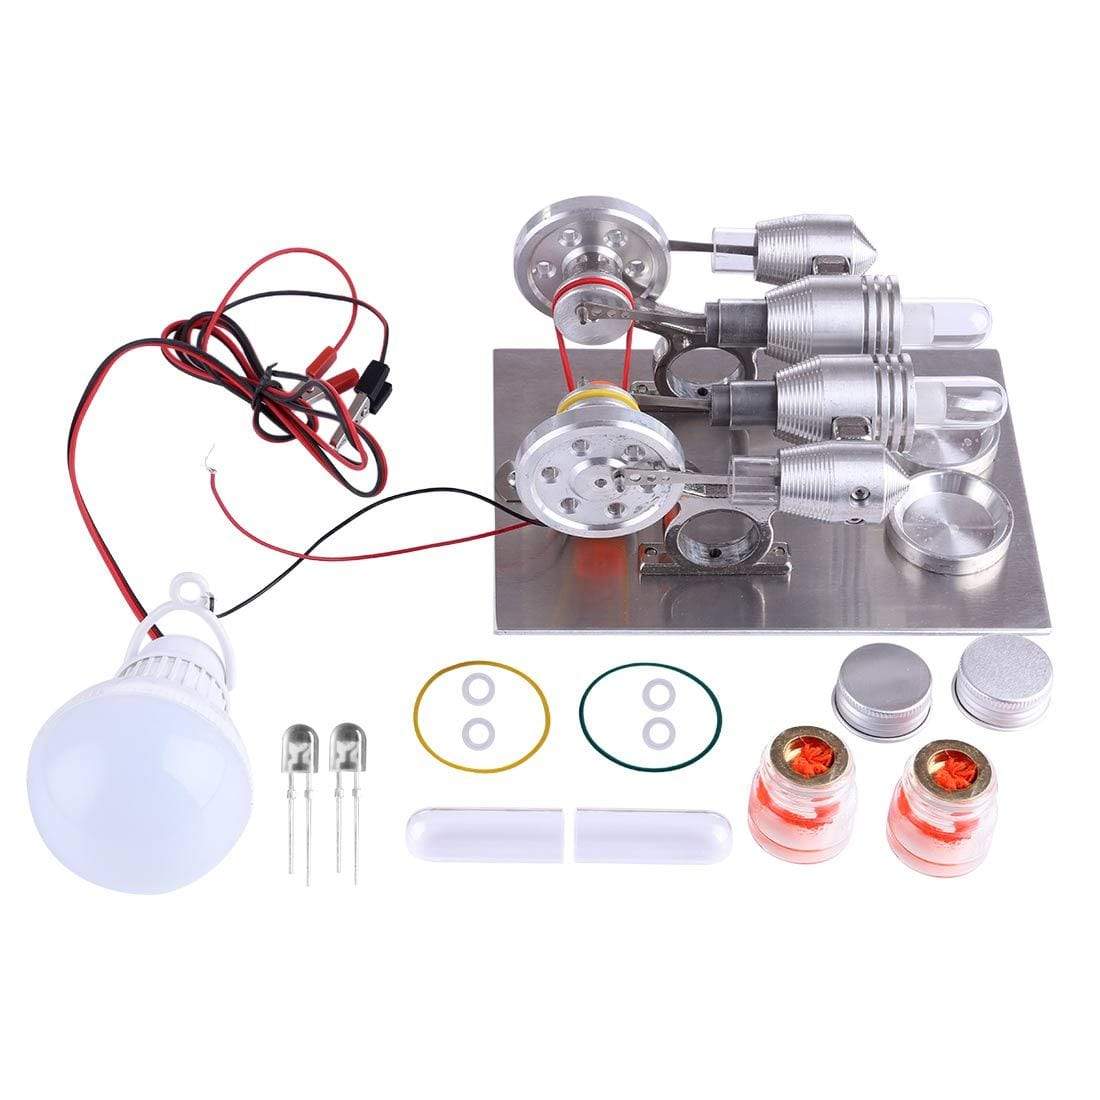 Double Cylinder Stirling Engine Motor Model Educational Toy Electricity Generator Physics Science Experiment Kits 2